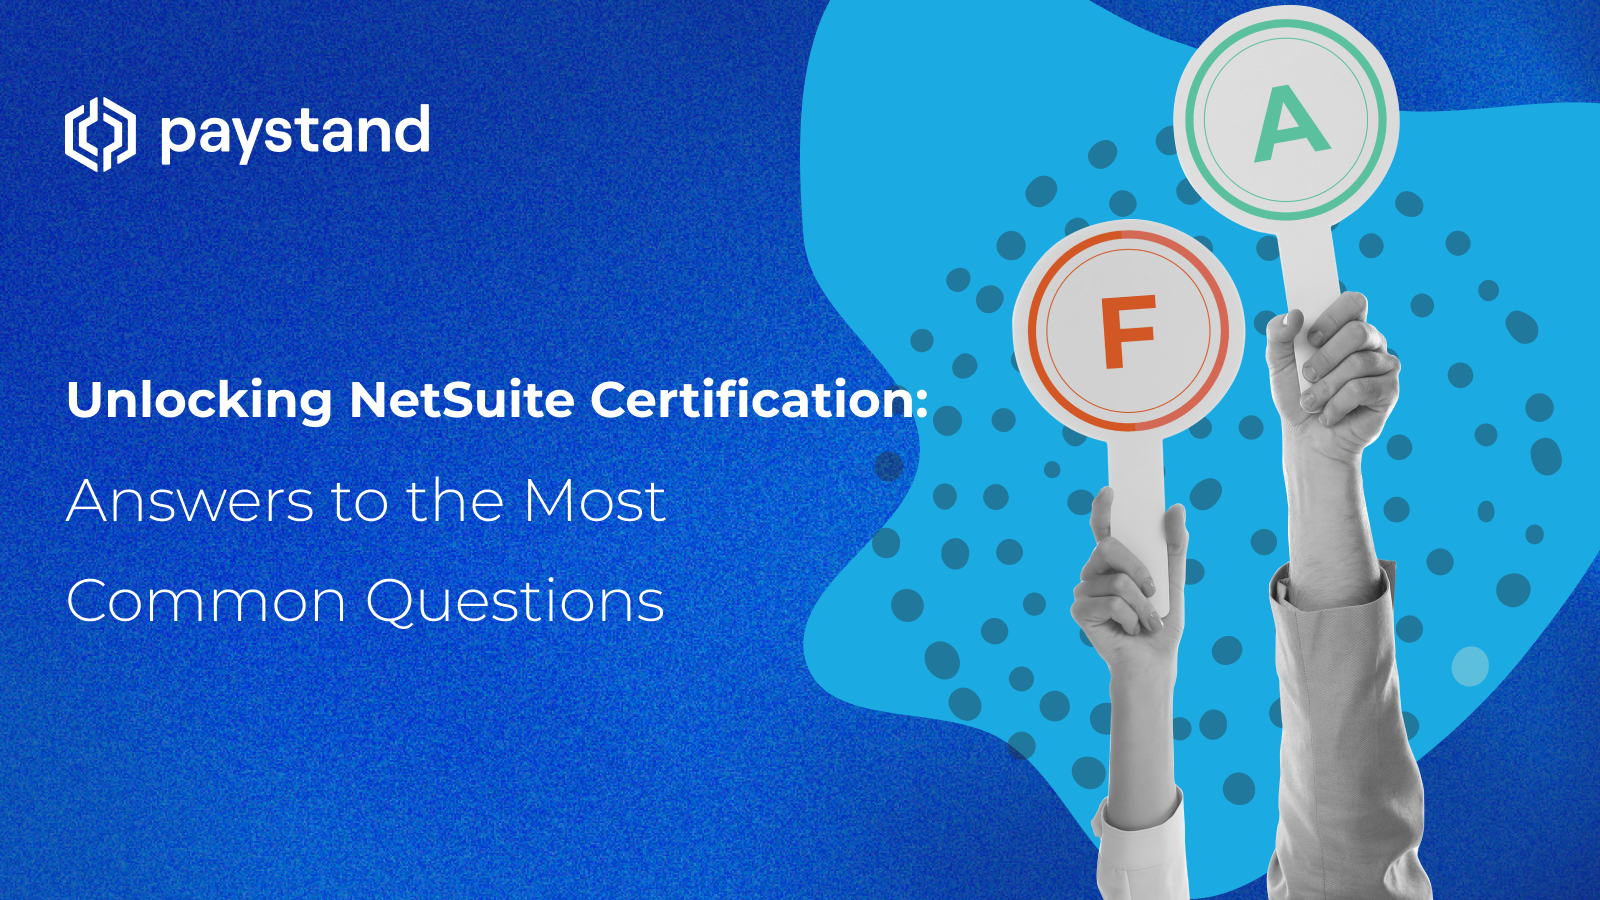 Unlocking NetSuite Certification: Answers to the Most Common Questions